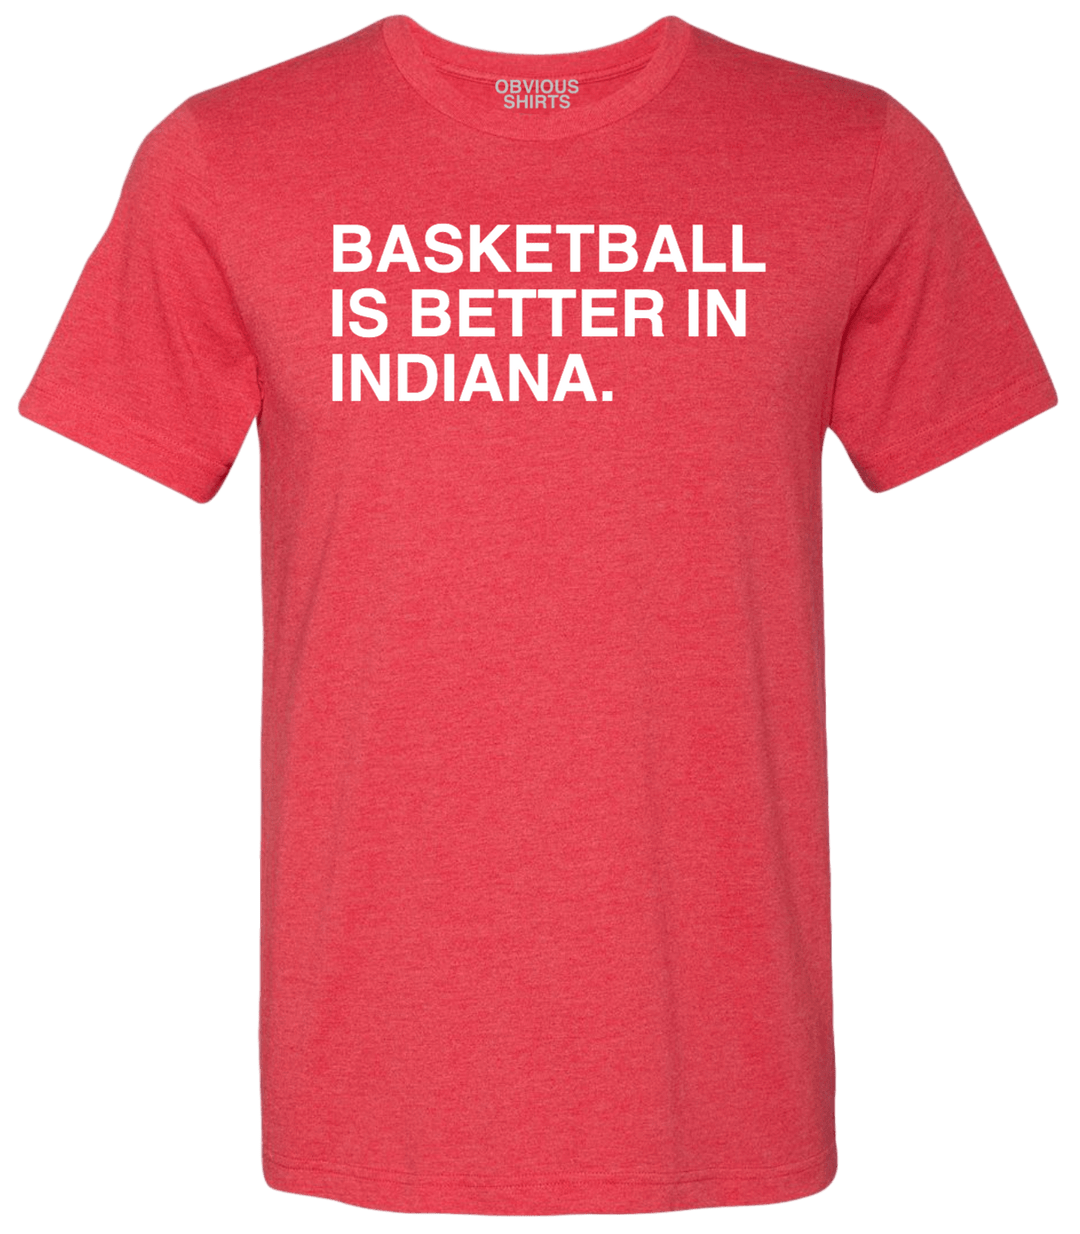 BASKETBALL IS BETTER IN INDIANA. - OBVIOUS SHIRTS.